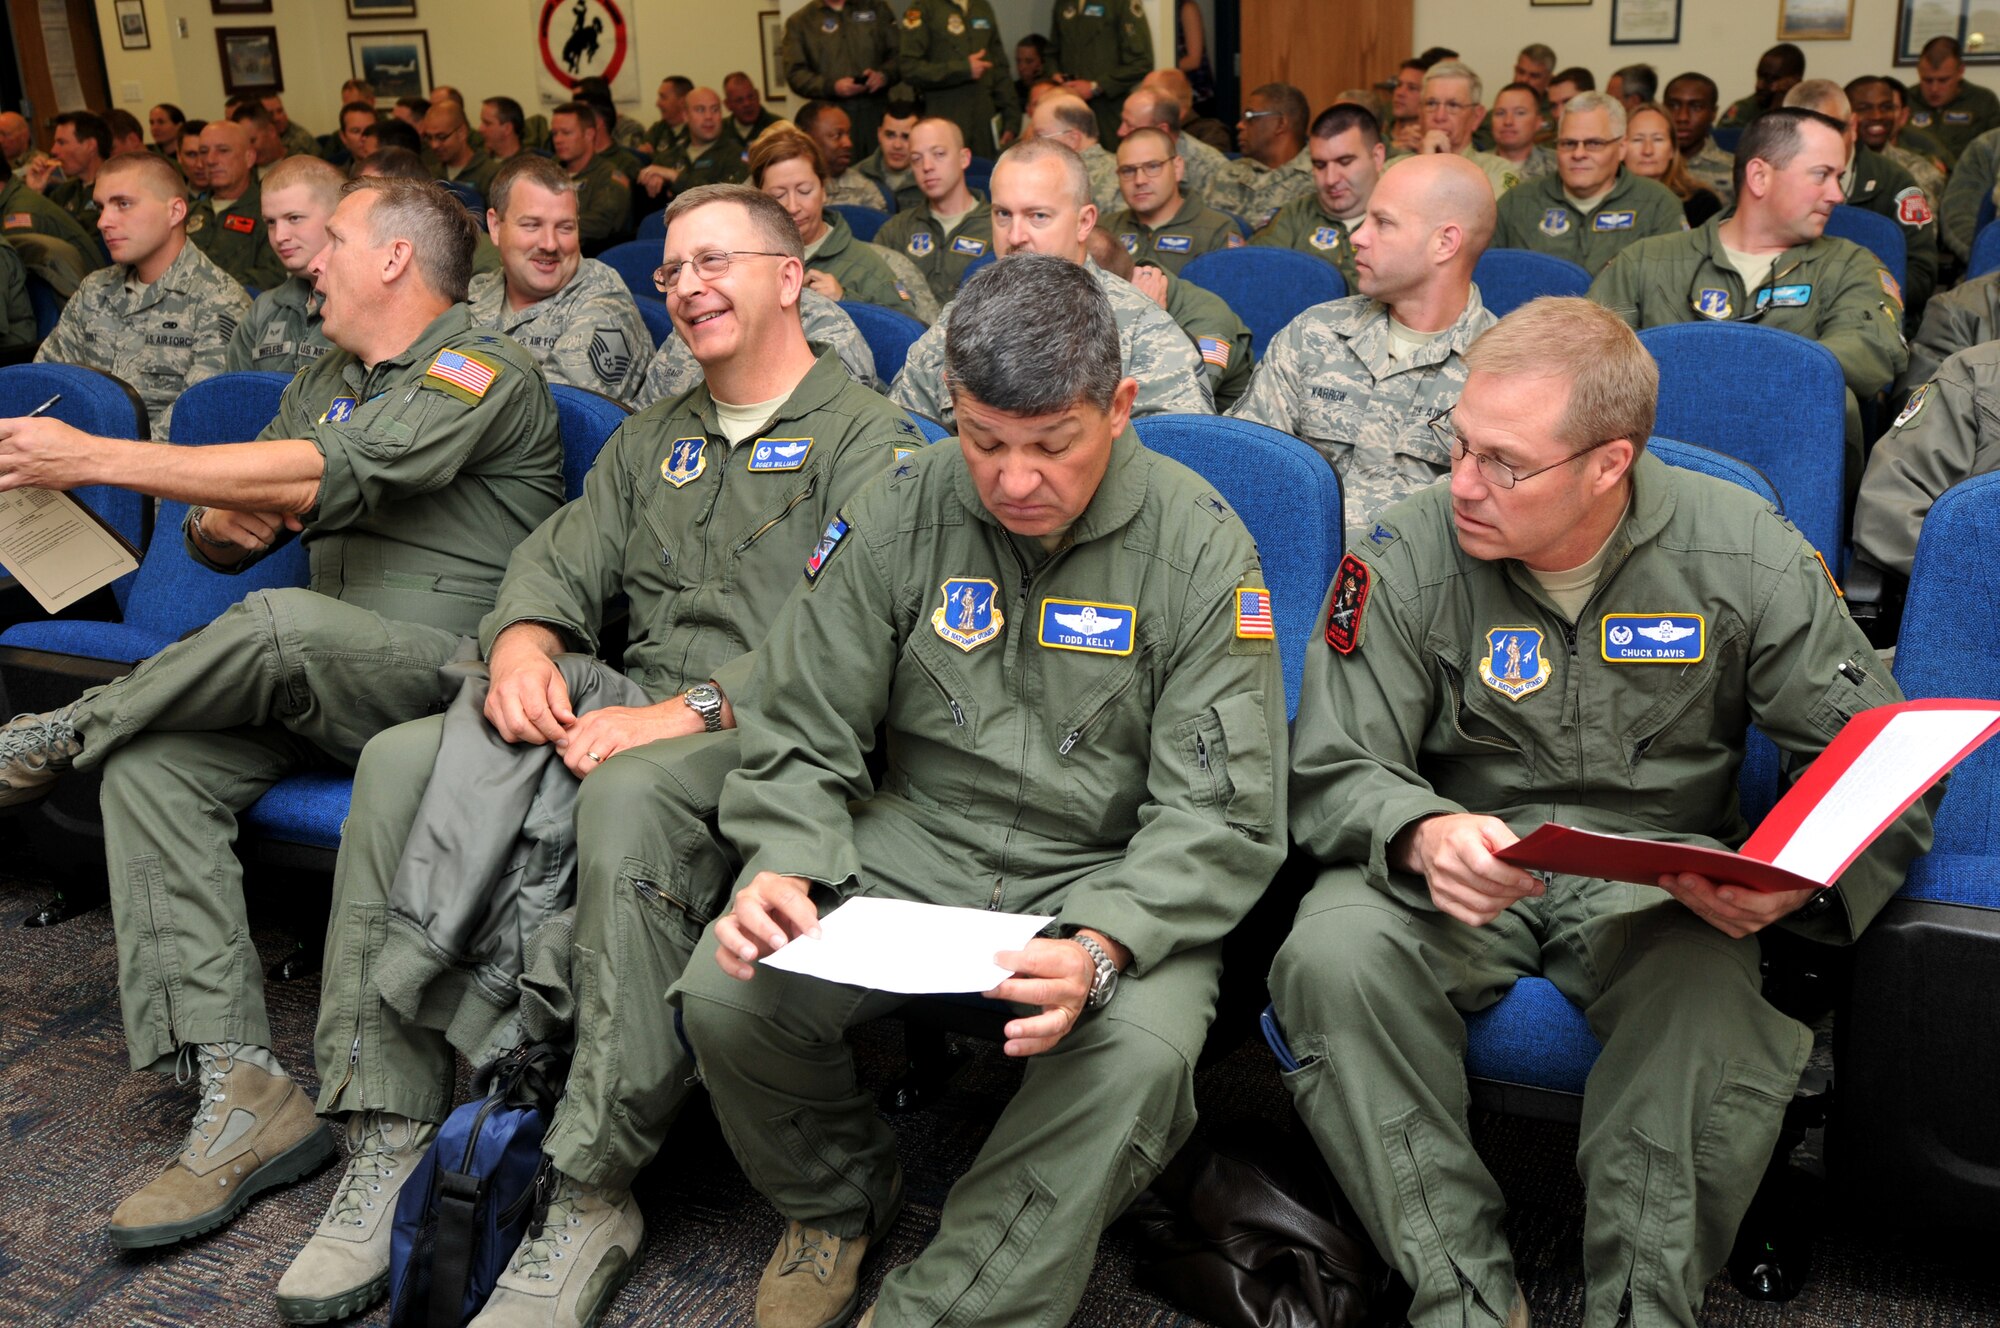 U.S. Air Force Col. Charles D. Davis, III, Air Expeditionary Group commander, Brig. Gen. Todd Kelly, N.C. assistant adjutant general-Air and Col. Roger E. Williams, Jr., commander 145th Airlift Wing, North Carolina Air National Guard, listen to briefings May 6, 2013, during the start of the annual Modular Airborne Fire Fighting System (MAFFS) training. This year’s MAFFS training will once again be hosted by the 153rd Airlift Wing, Wyoming Air National Guard, at the Cheyenne Regional Airport, Cheyenne, Wyo. (U.S. Air National Guard photo by Master Sgt. Patricia F. Moran/Released)